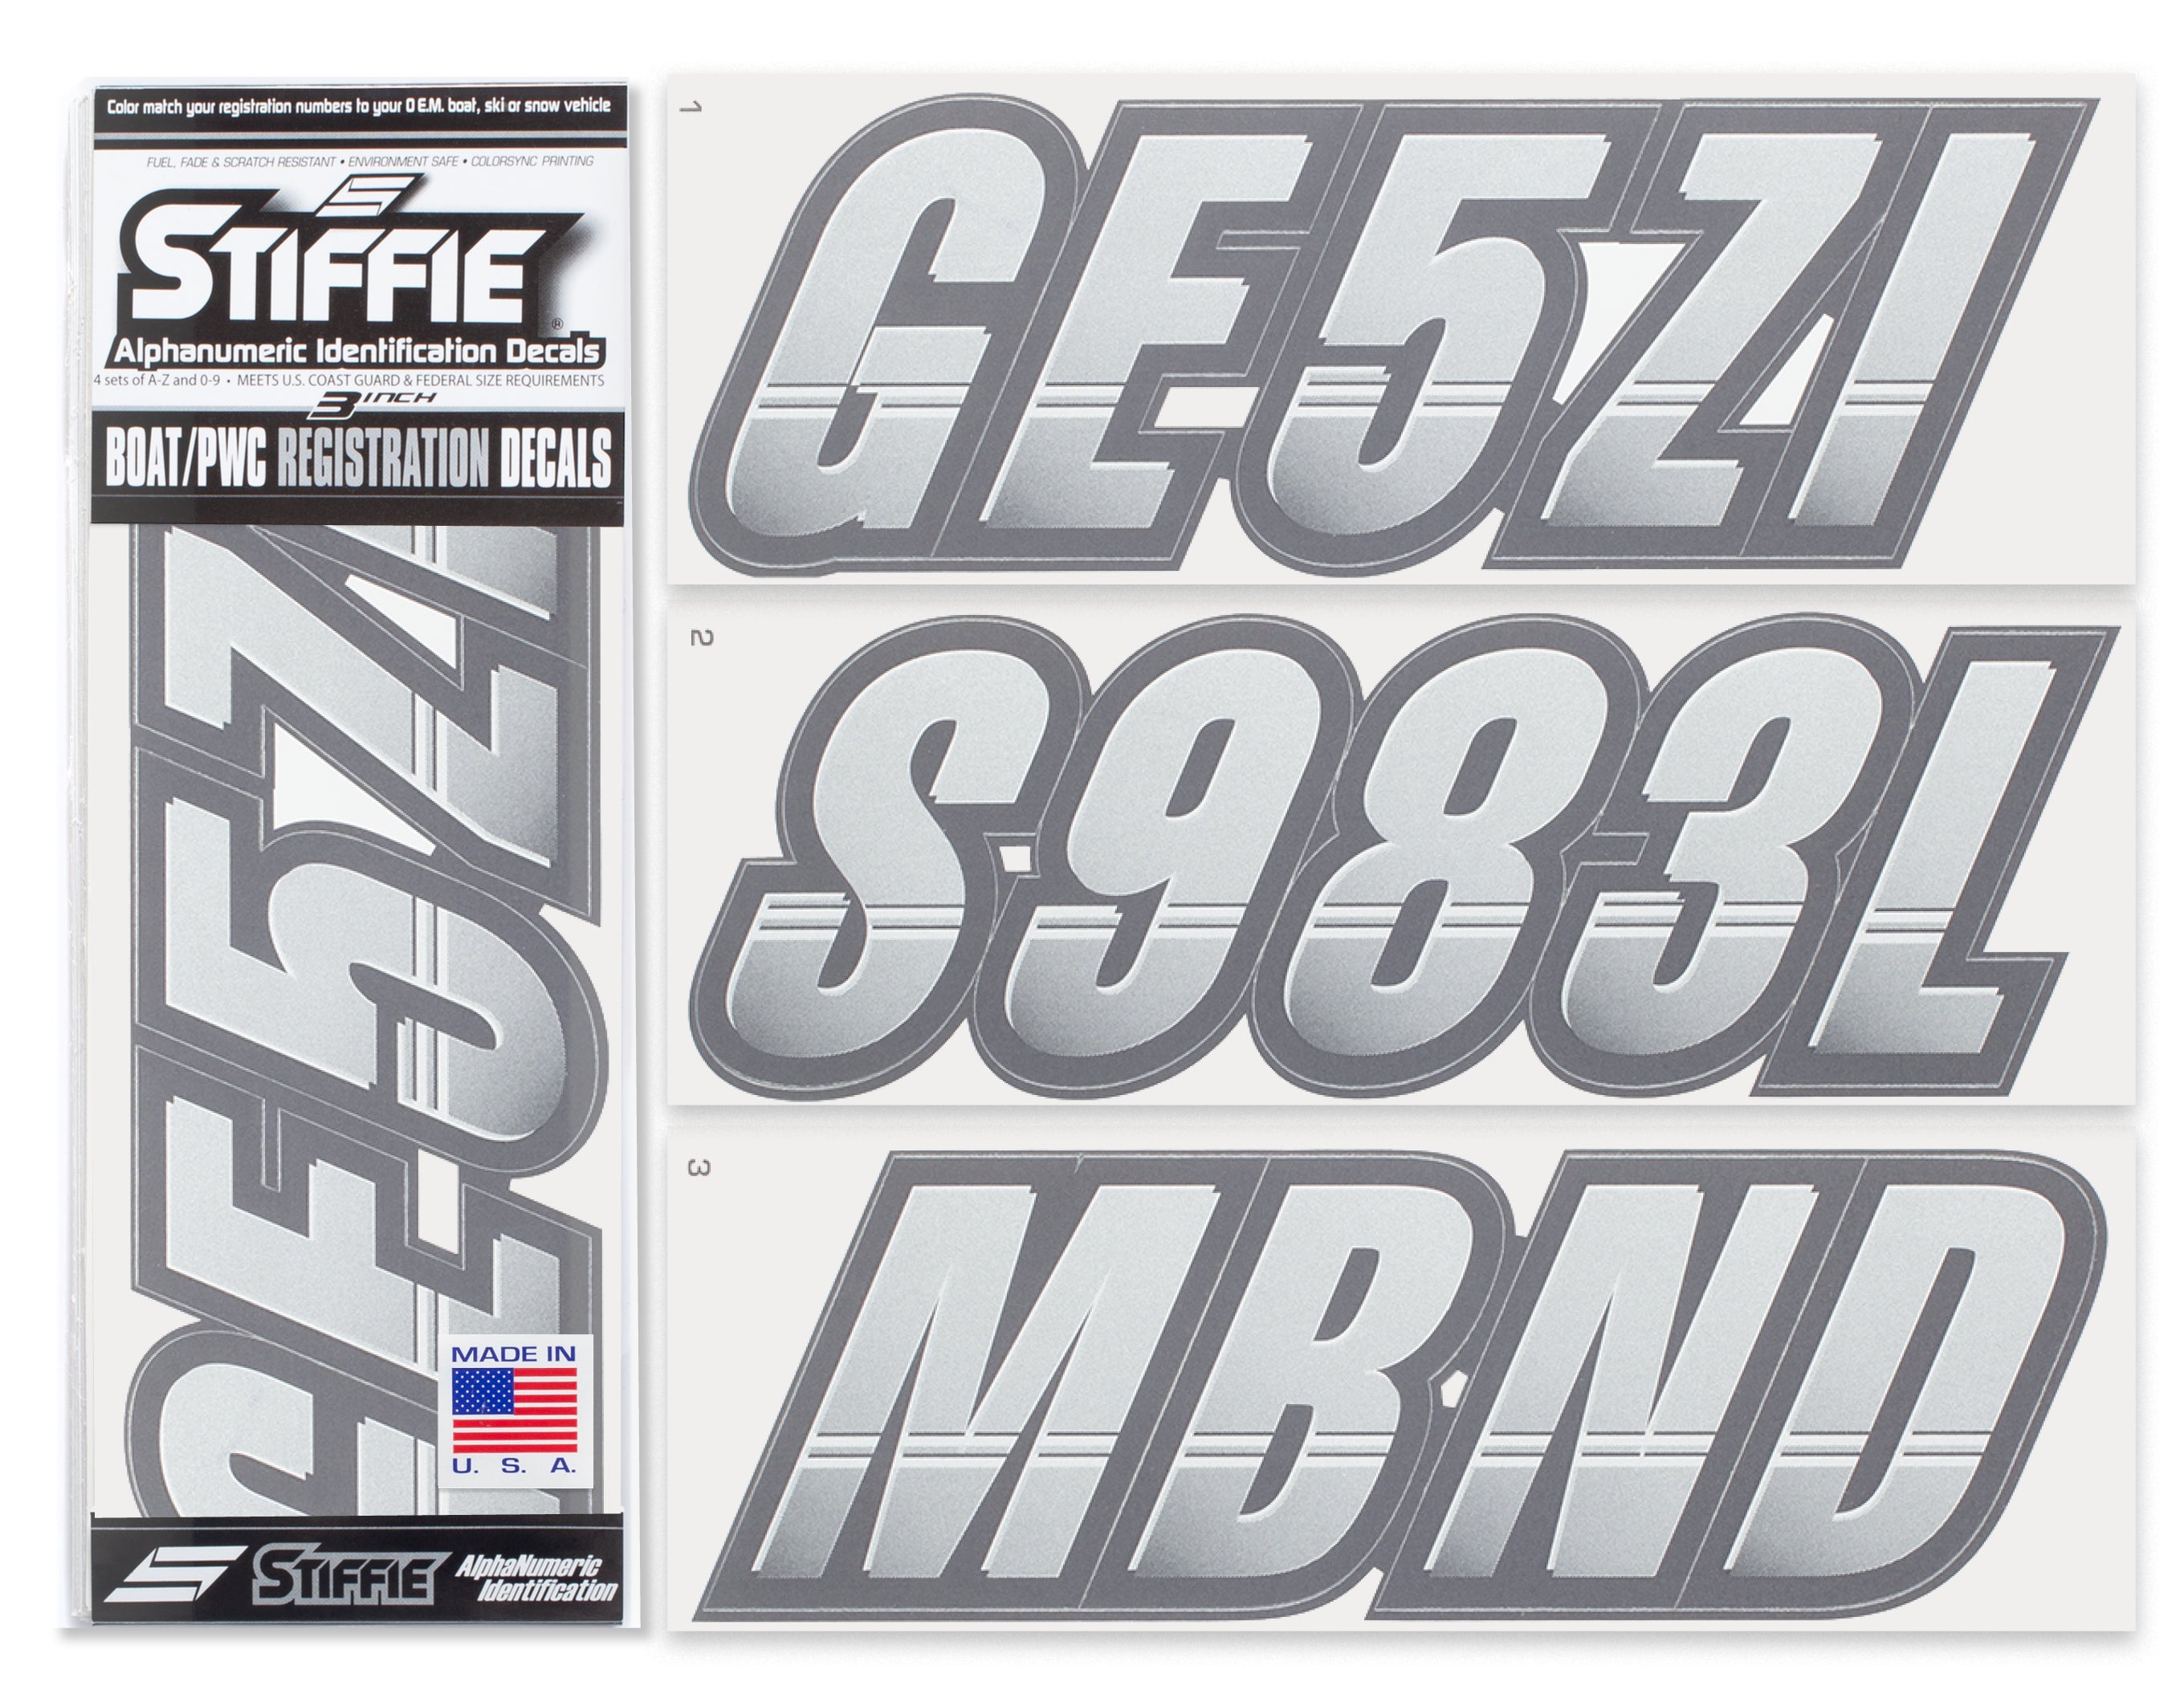 Stiffie Techtron Metallic Silver/Carbon 3" Alpha-Numeric Registration Identification Numbers Stickers Decals for Boats & Personal Watercraft